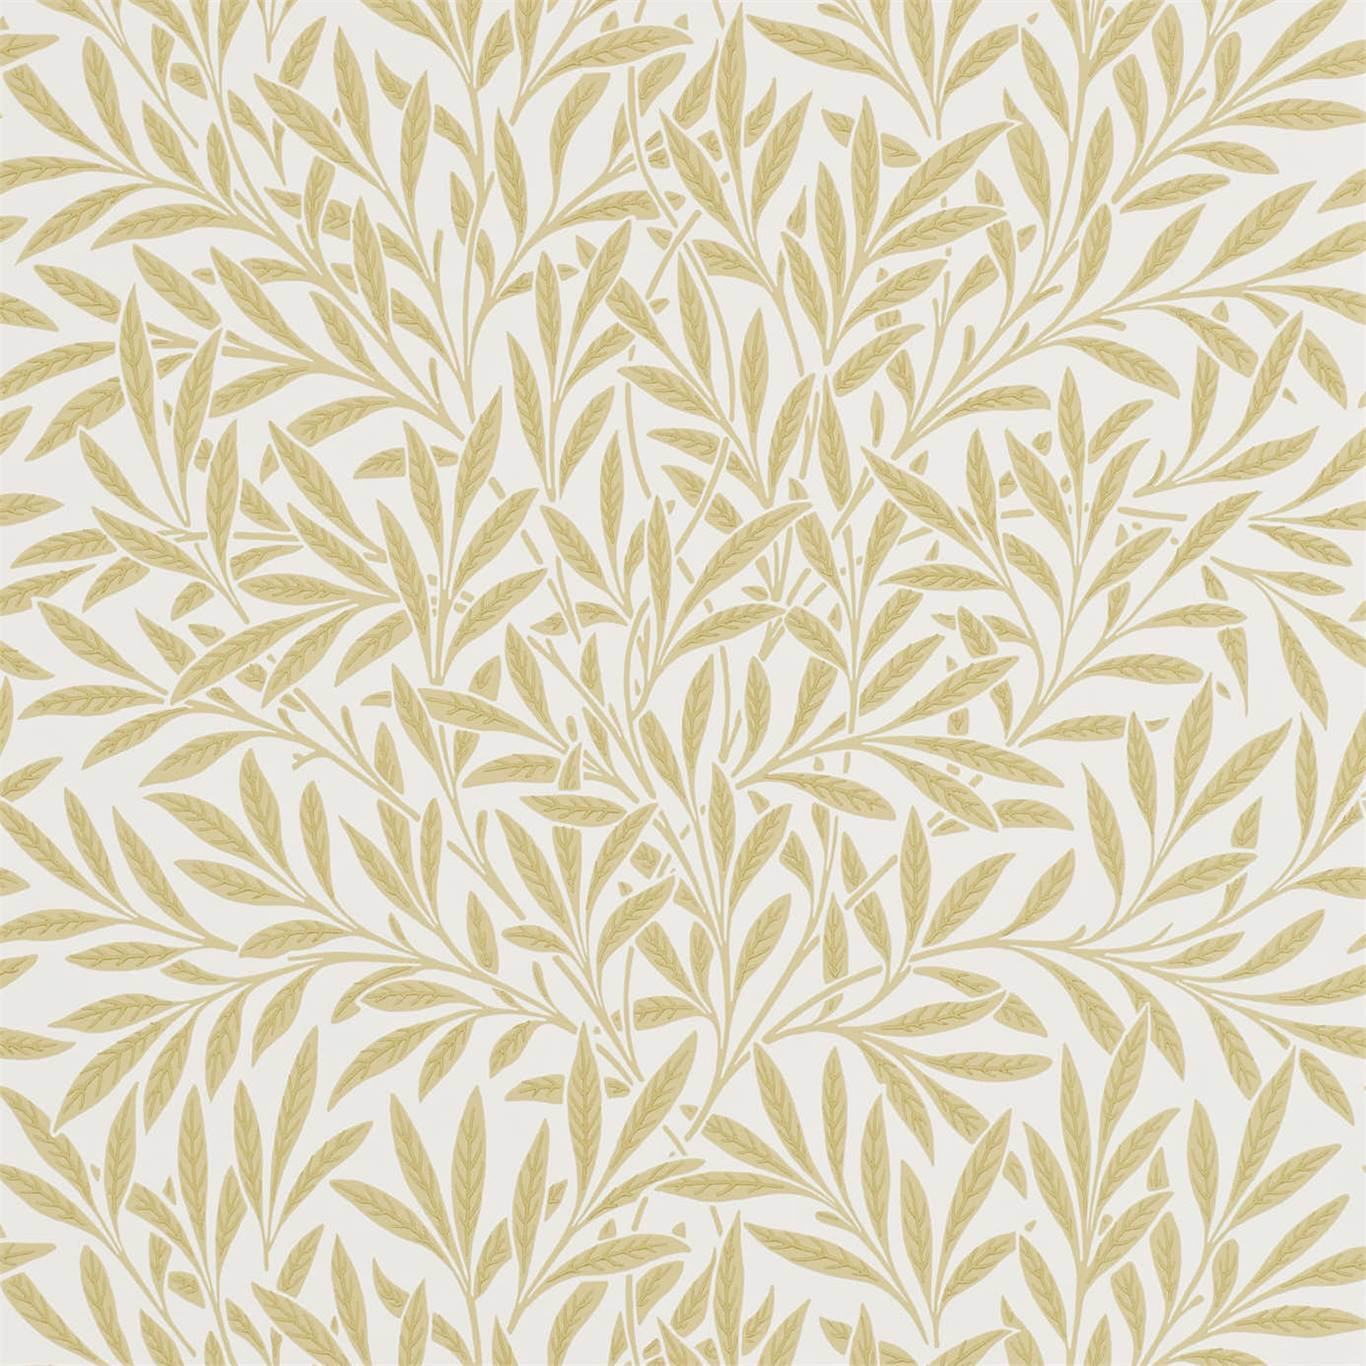 Willow Camomile Wallpaper DCMW216830 by Morris & Co